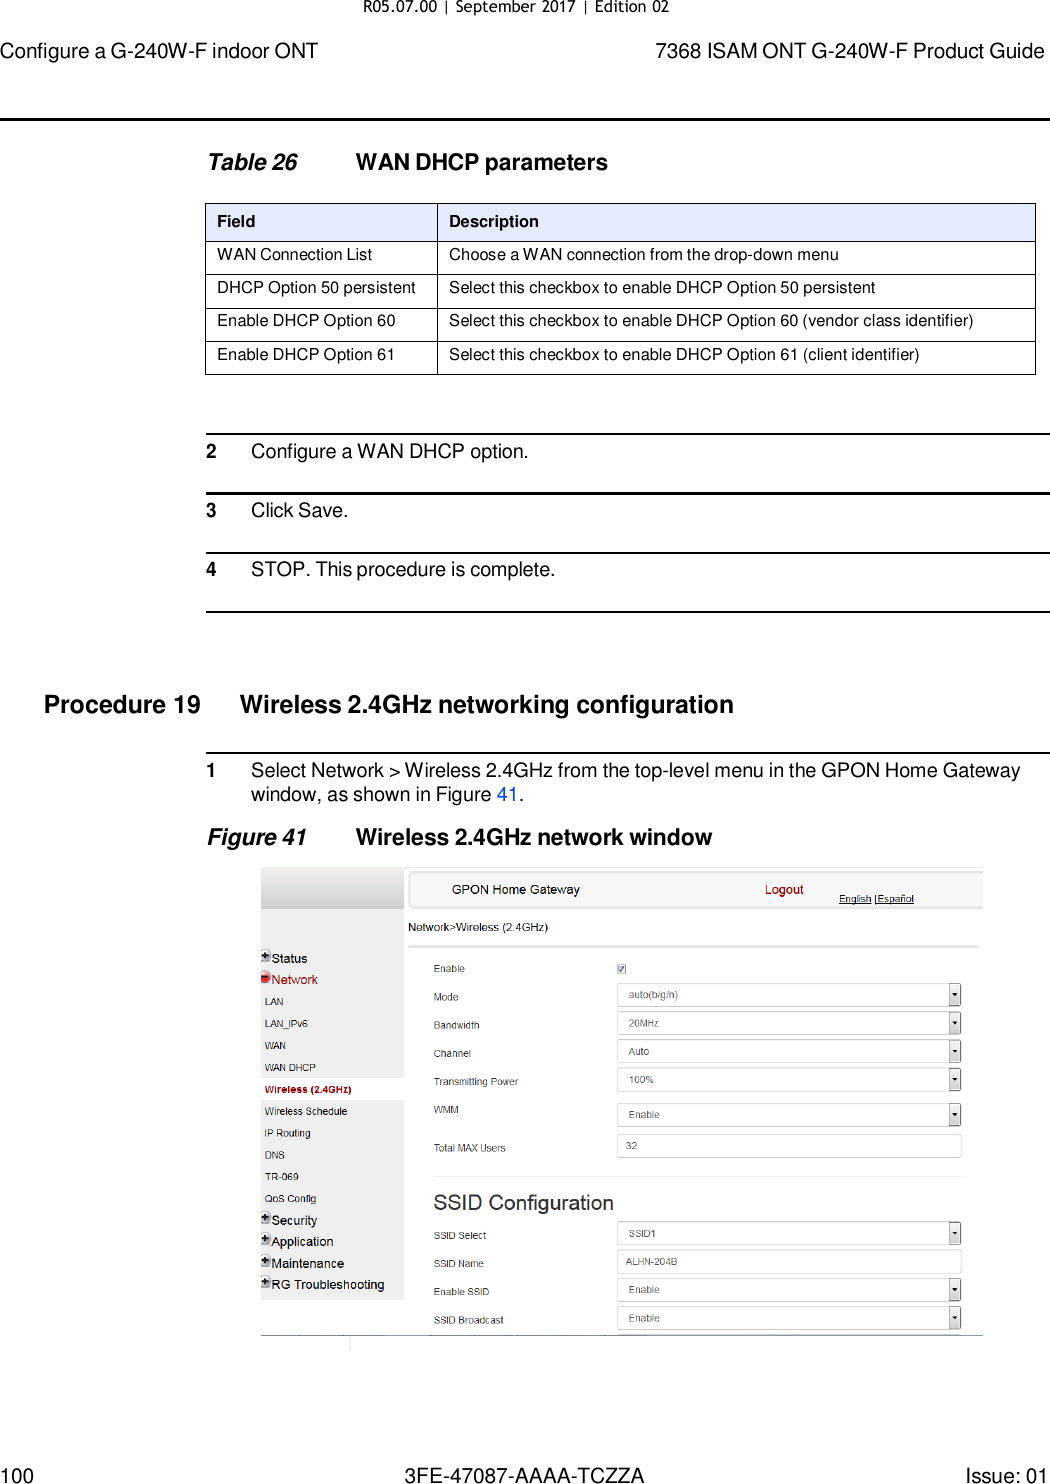 Page 94 of Nokia Bell G240WFV2 7368 ISAM GPON ONU User Manual 7368 ISAM ONT G 240W F Product Guide